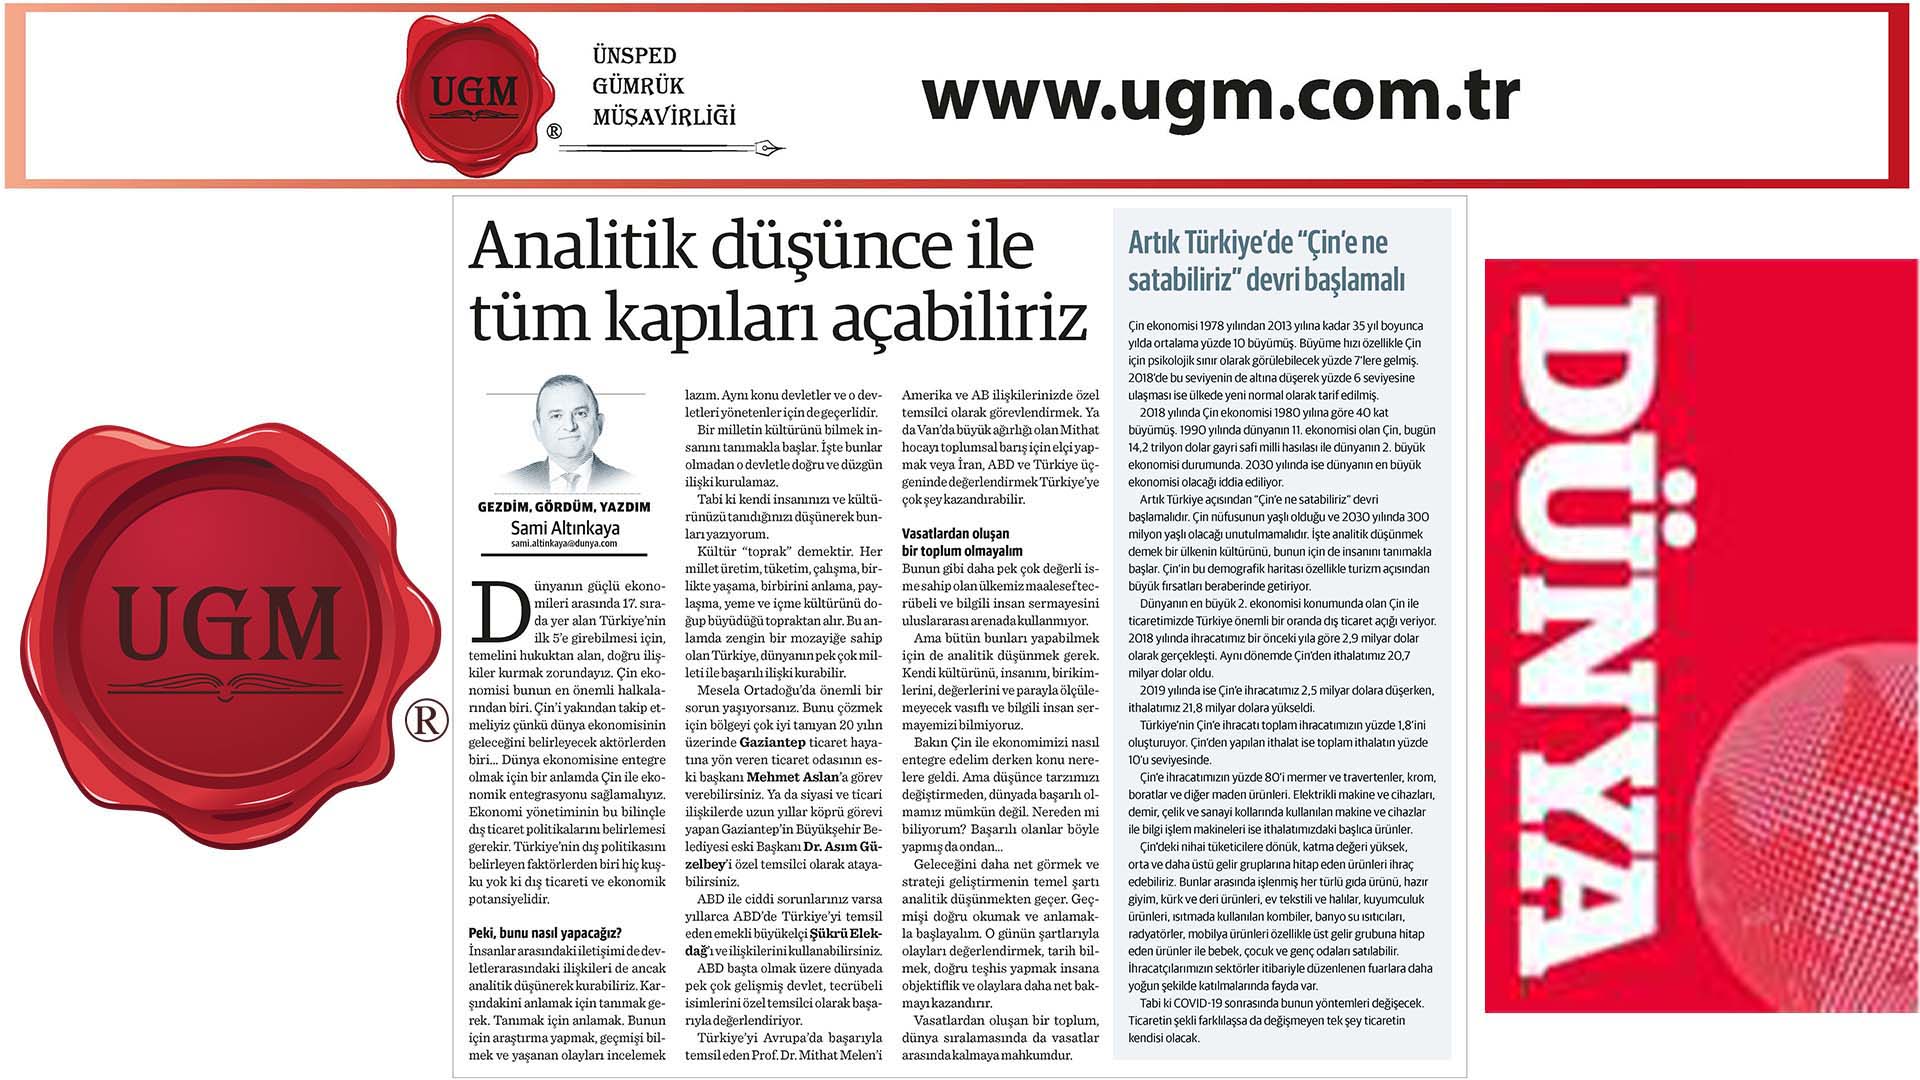 Our UGM Corporate Communication Director Sami Altınkaya's article titled "We can open all doors with analytical thinking" was published in Dünya Newspaper on 01.06.2020.